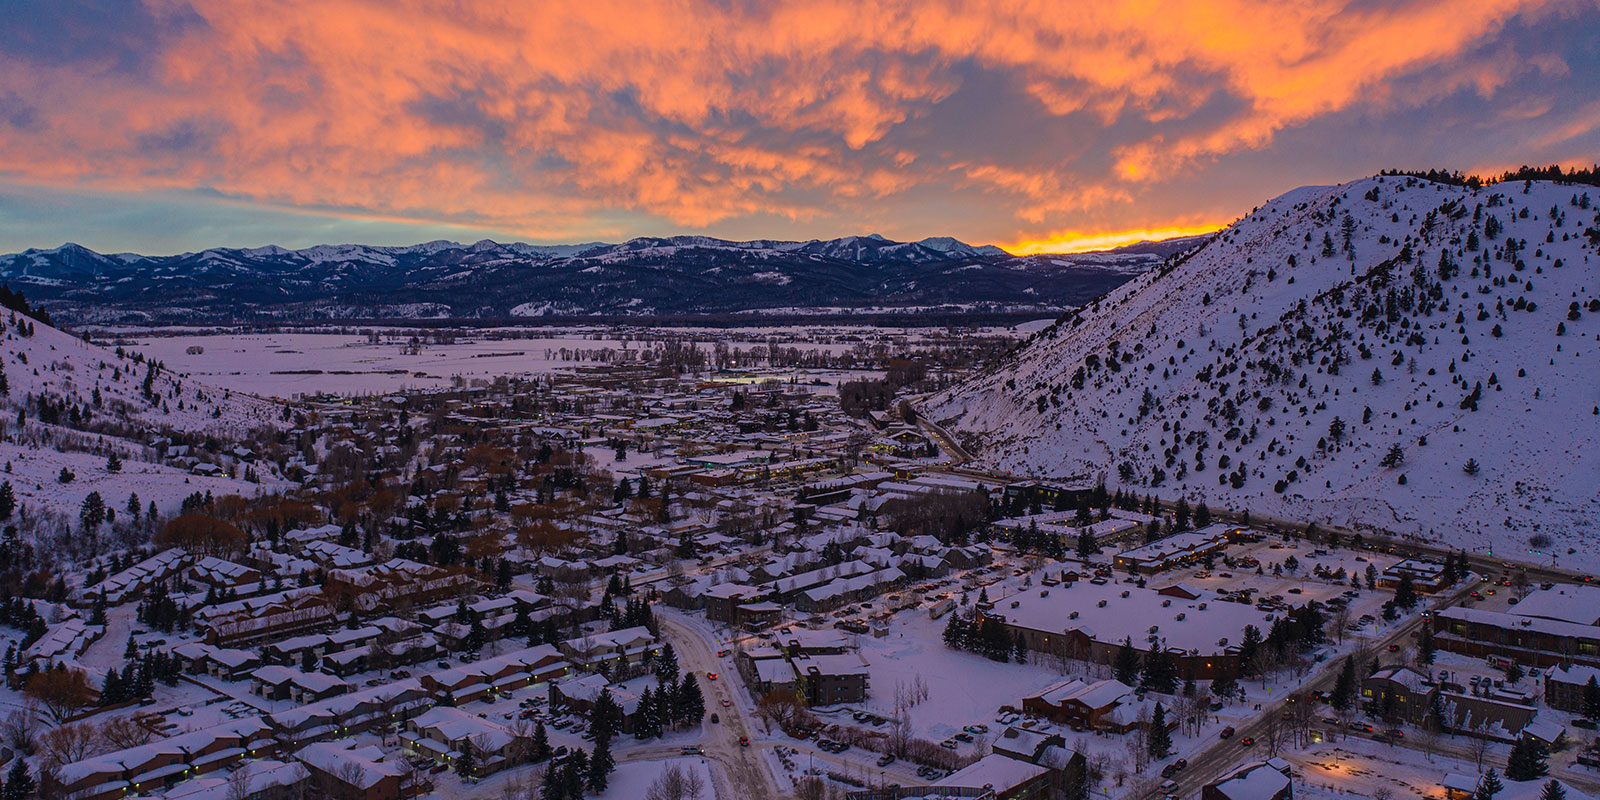 View over Jackson WY at sunset in winter from mountain top